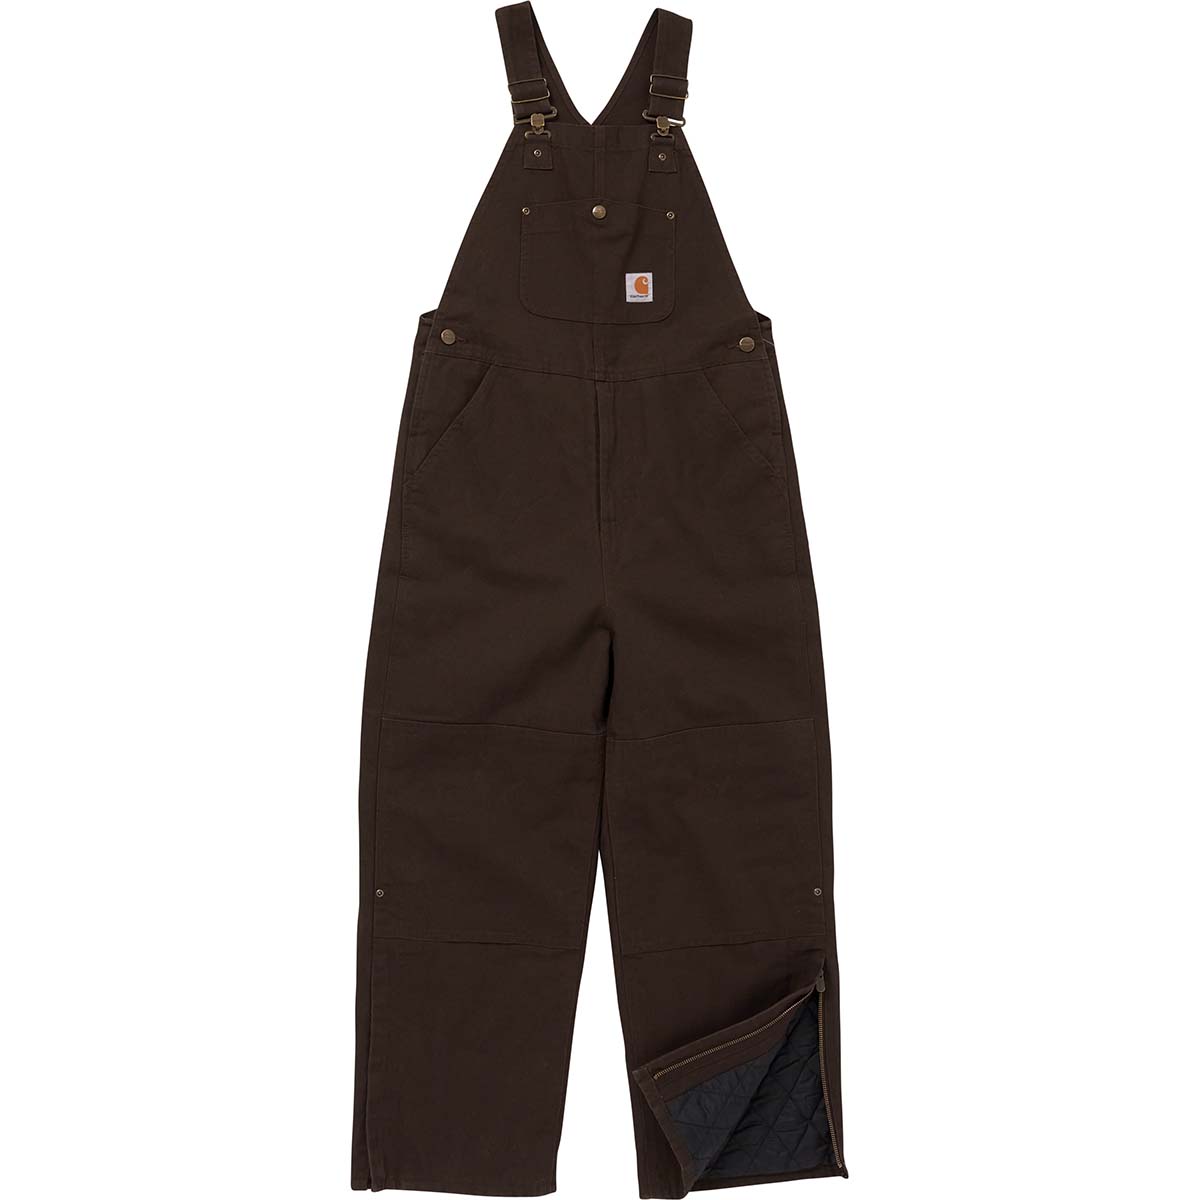 Carhartt Boy's Loose Fit Canvas Insulated Bib Overall